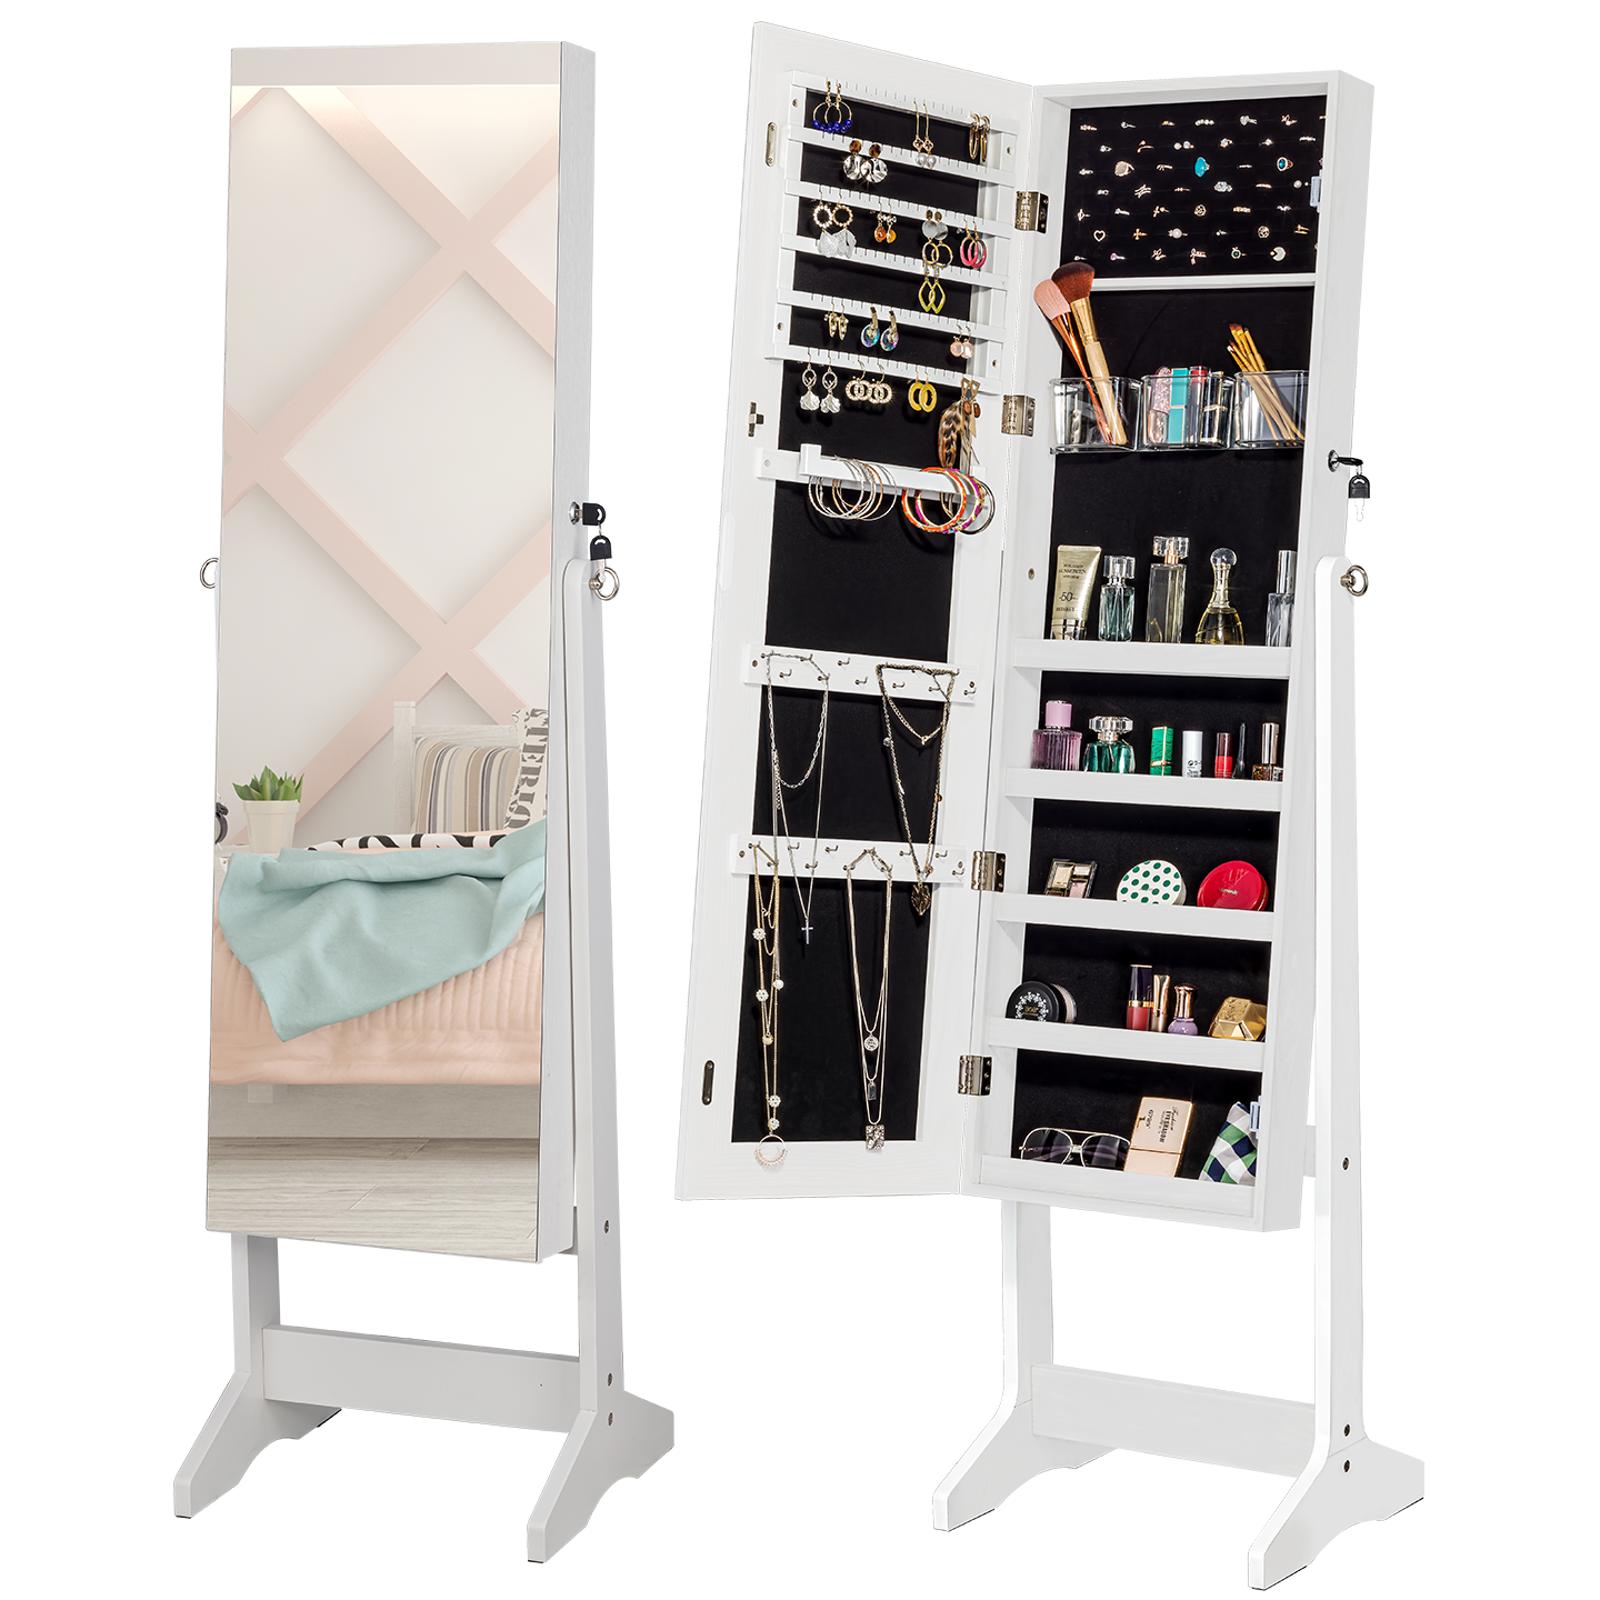 ViscoLogic Melanie Jewelry Armoire Makeup Mirrored Storage Cabinet for Cosmetics, Jewelry, Lockable Cabinet and Organizer With Dressing Mirror (White)